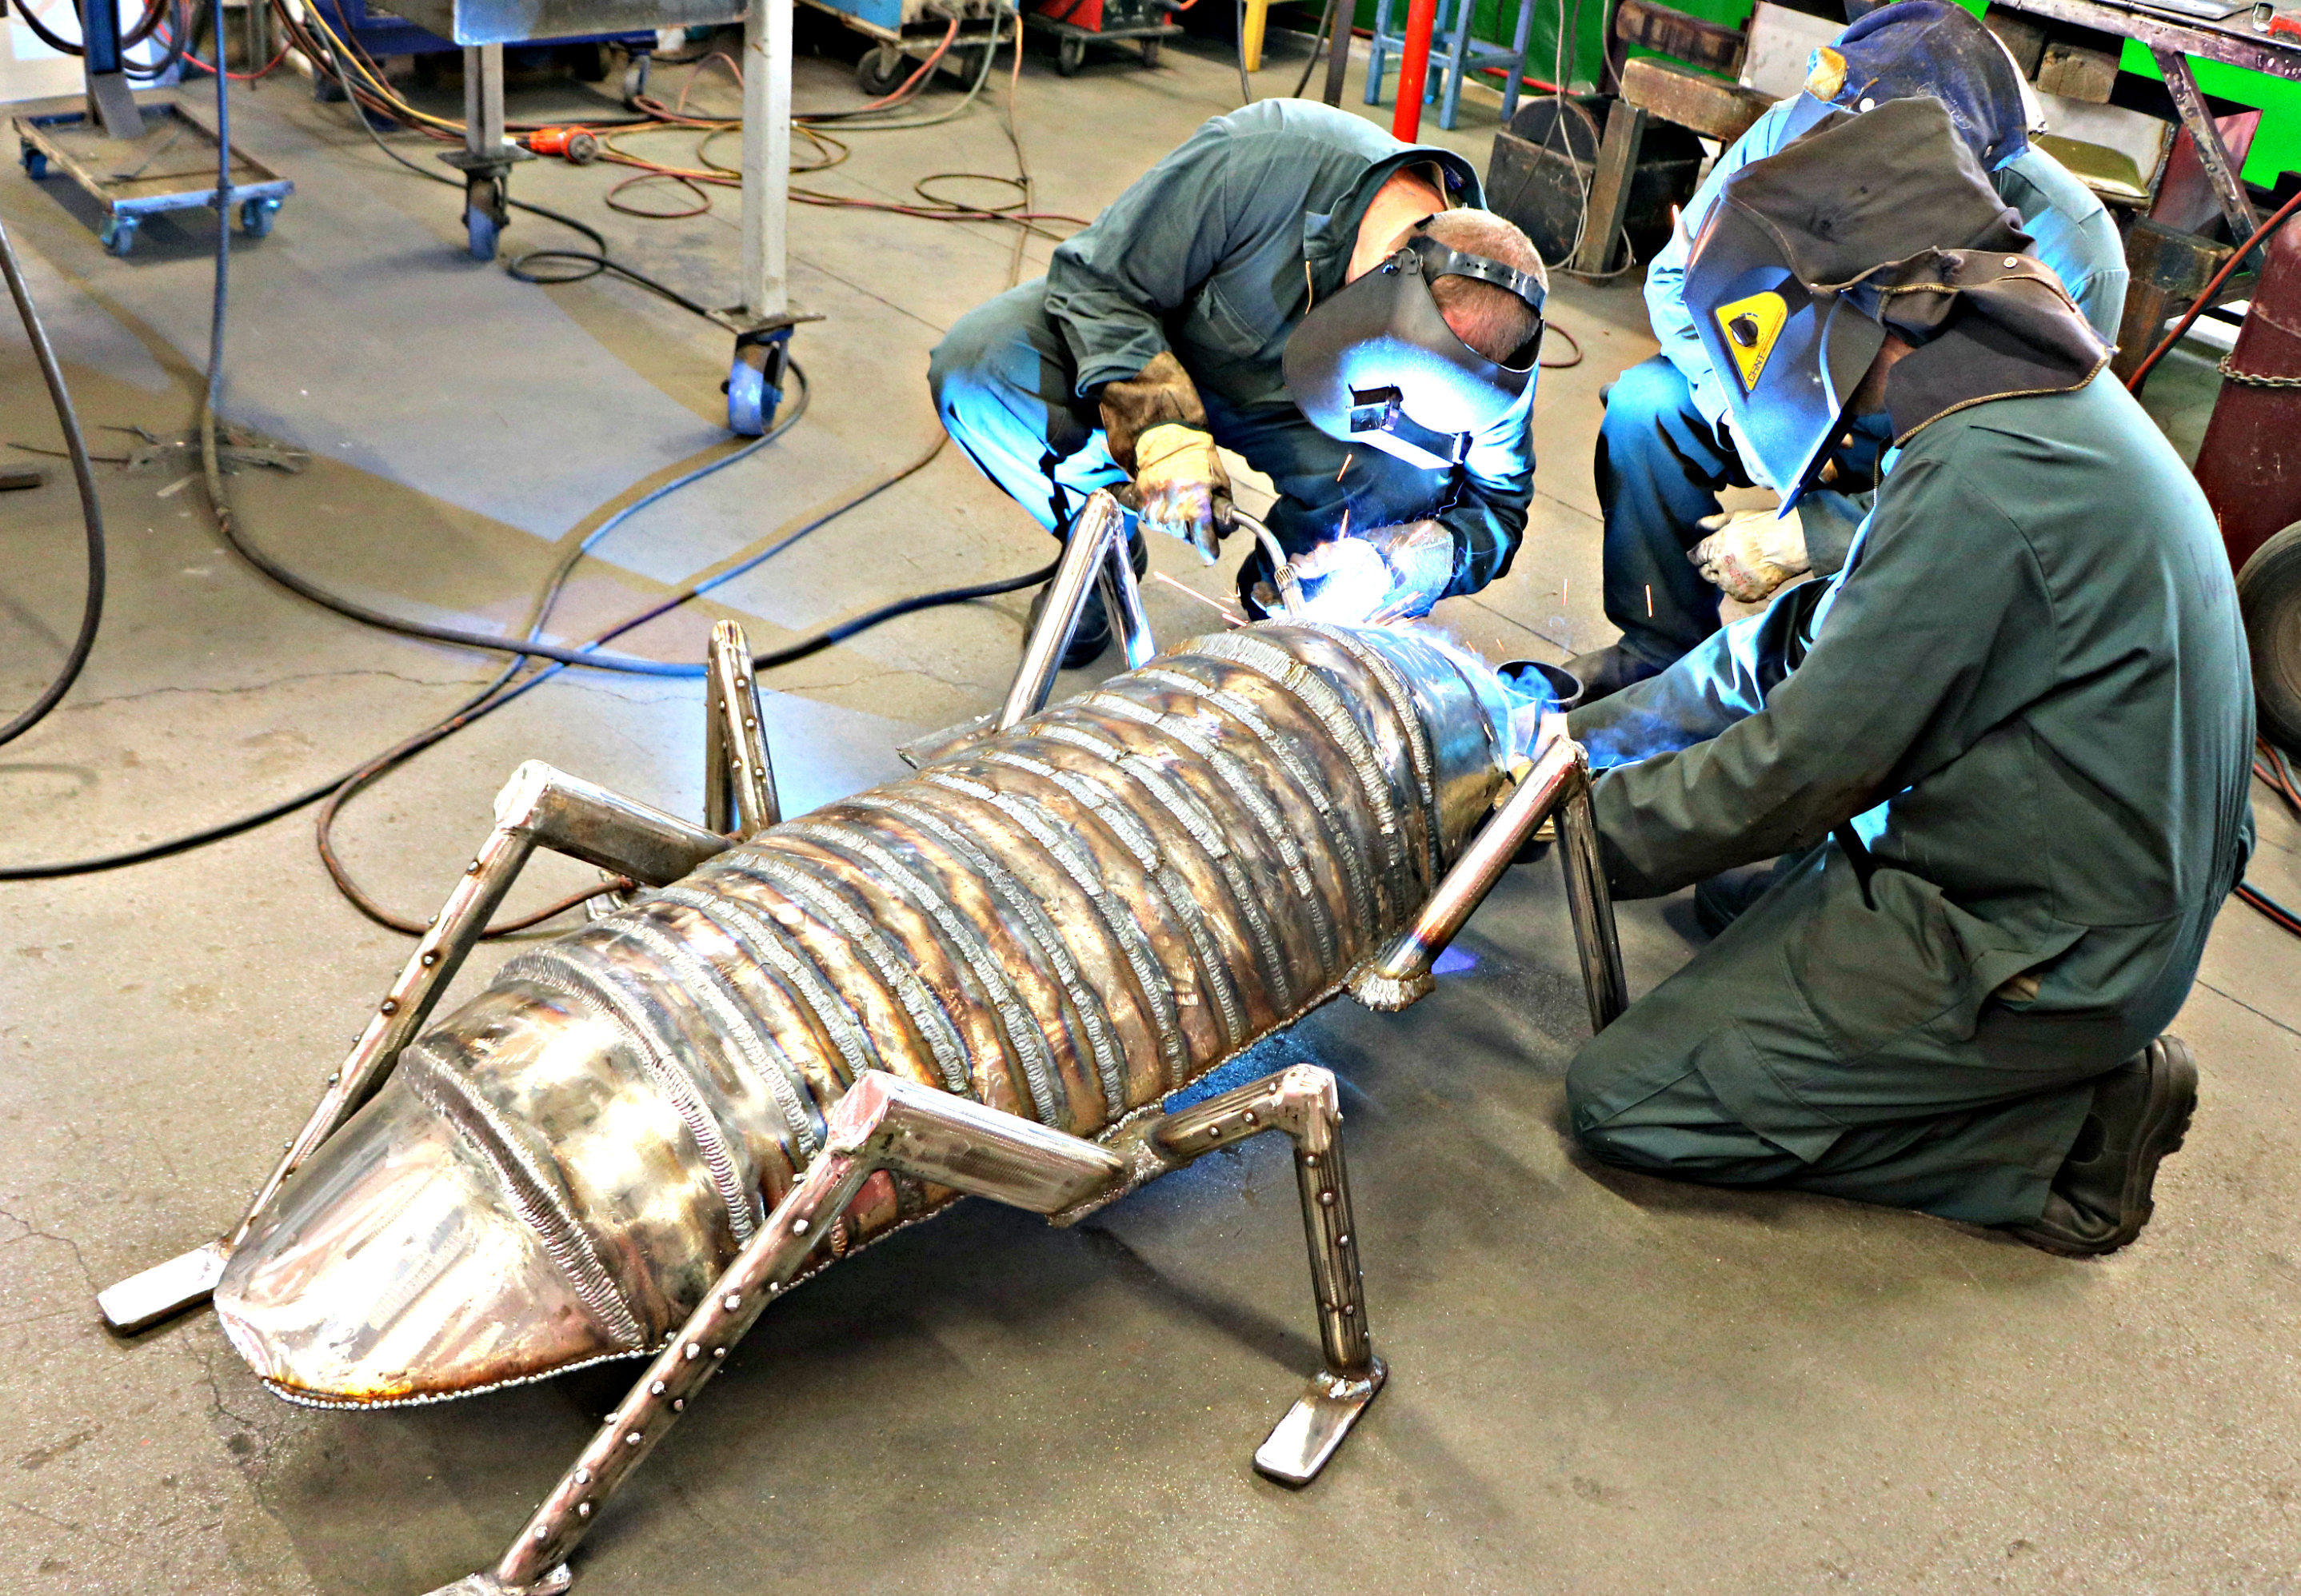 Men in the welding workshop at Auckland Prison learn to weld, making art like this giant metal insect sculpture